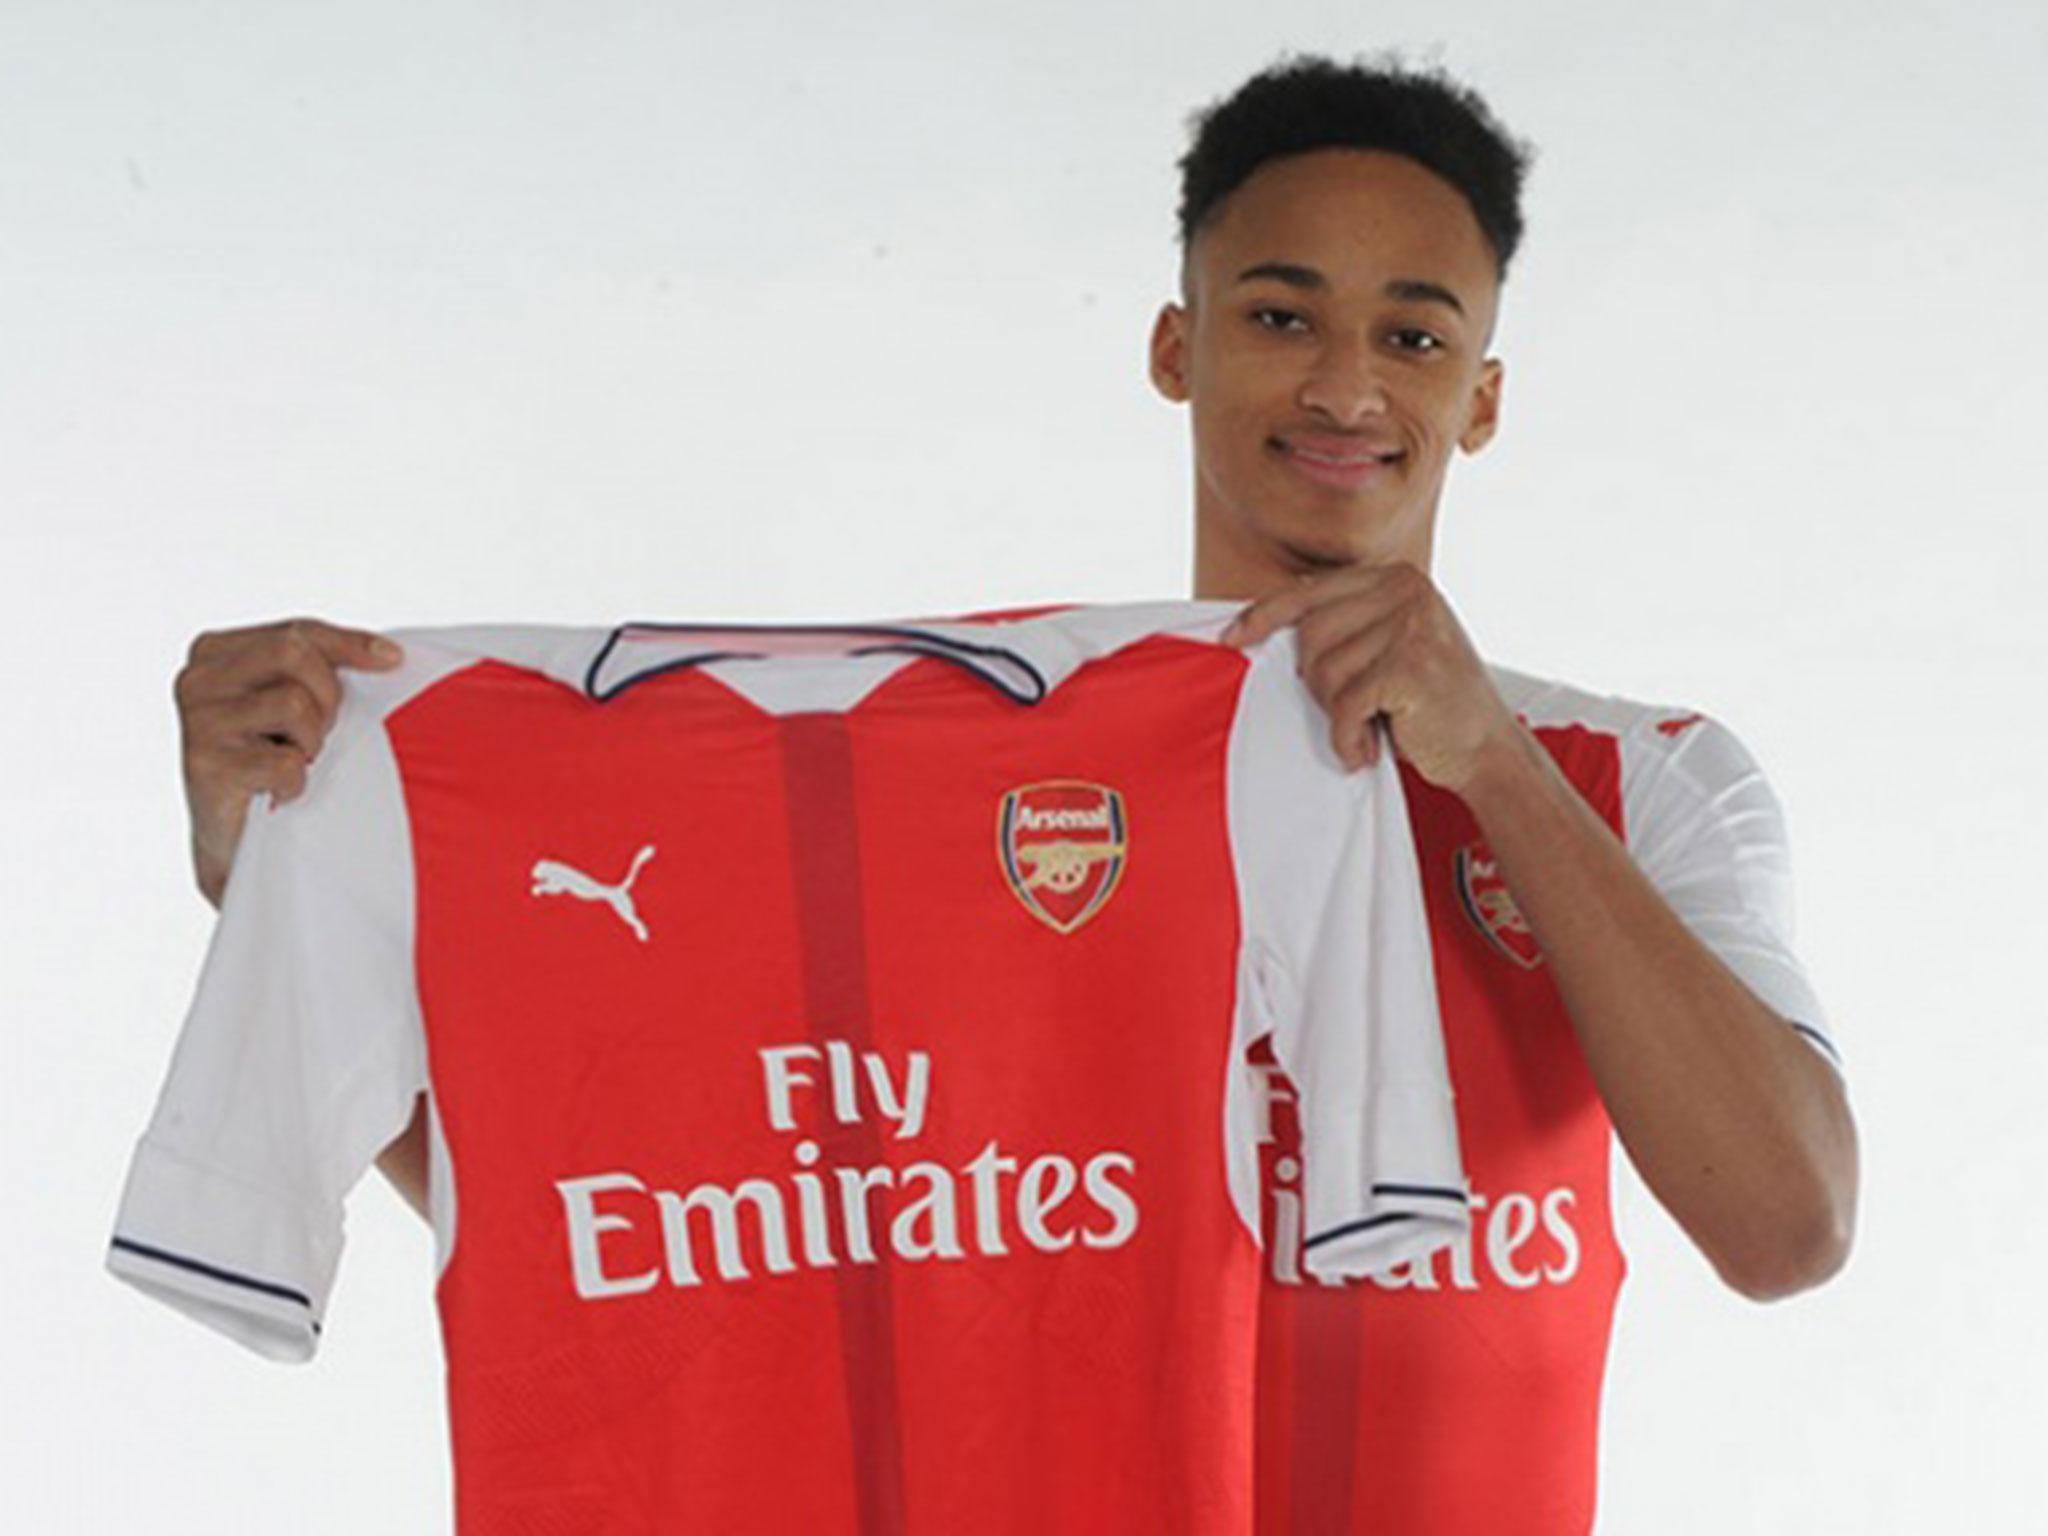 Arsenal have announced the signing of Cohen Bramall from non-league Hednesford Town